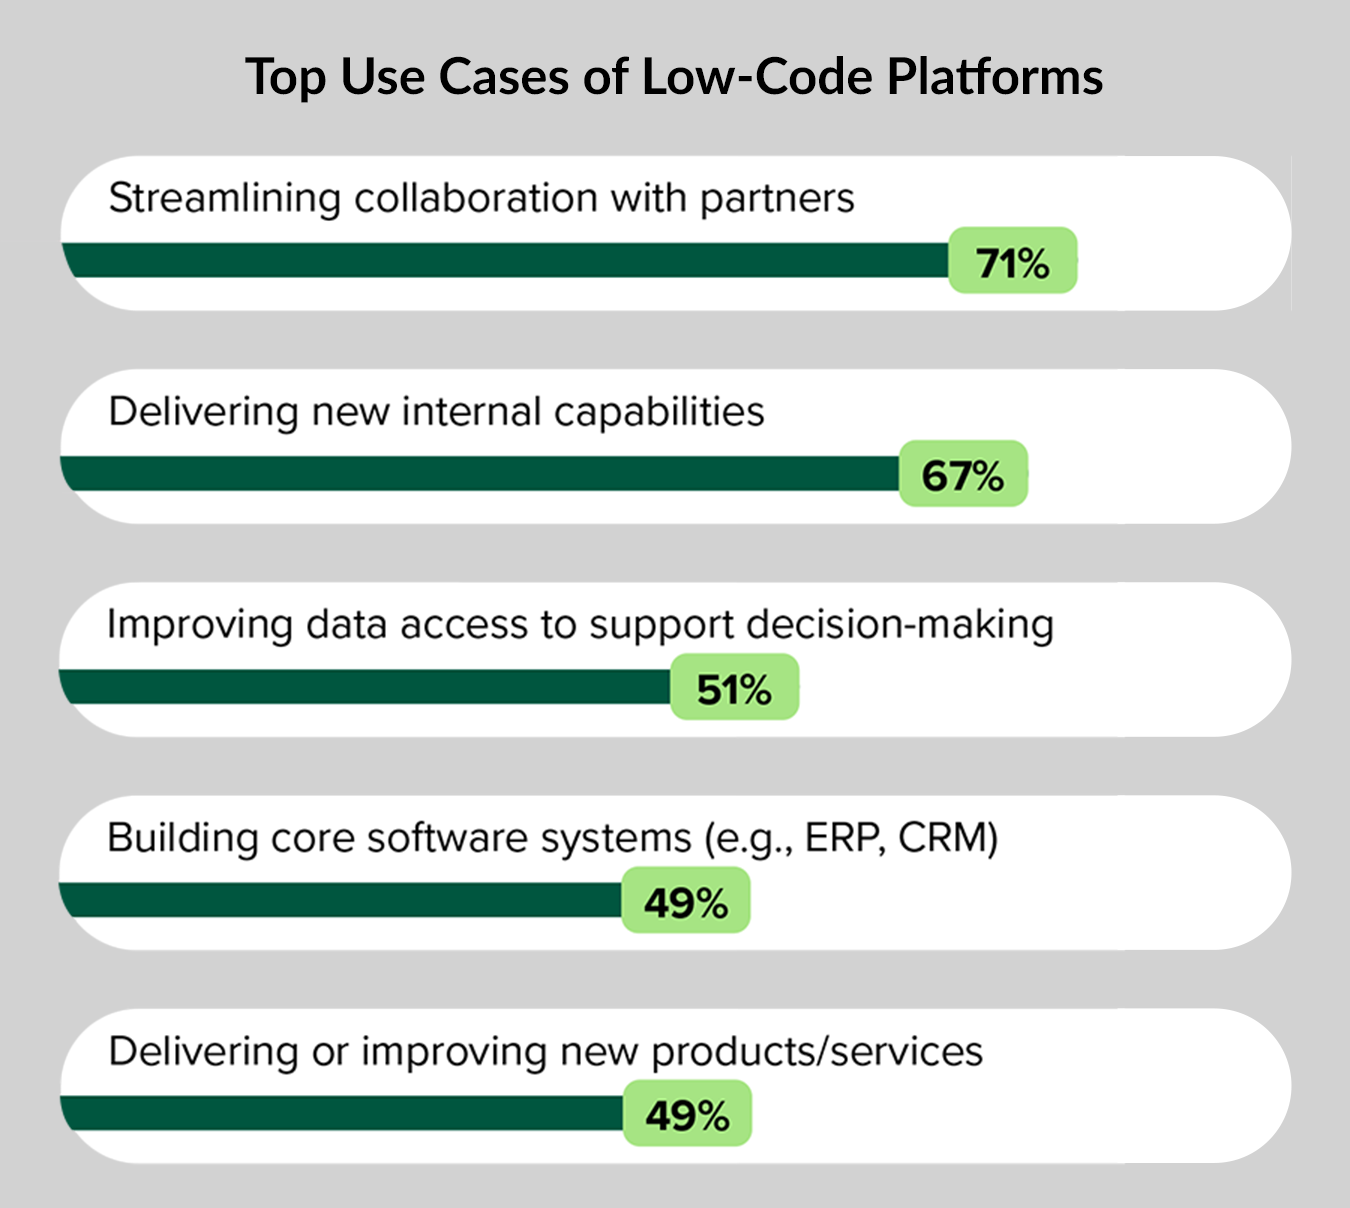 Top Use Cases of Low-Code Platforms graphic